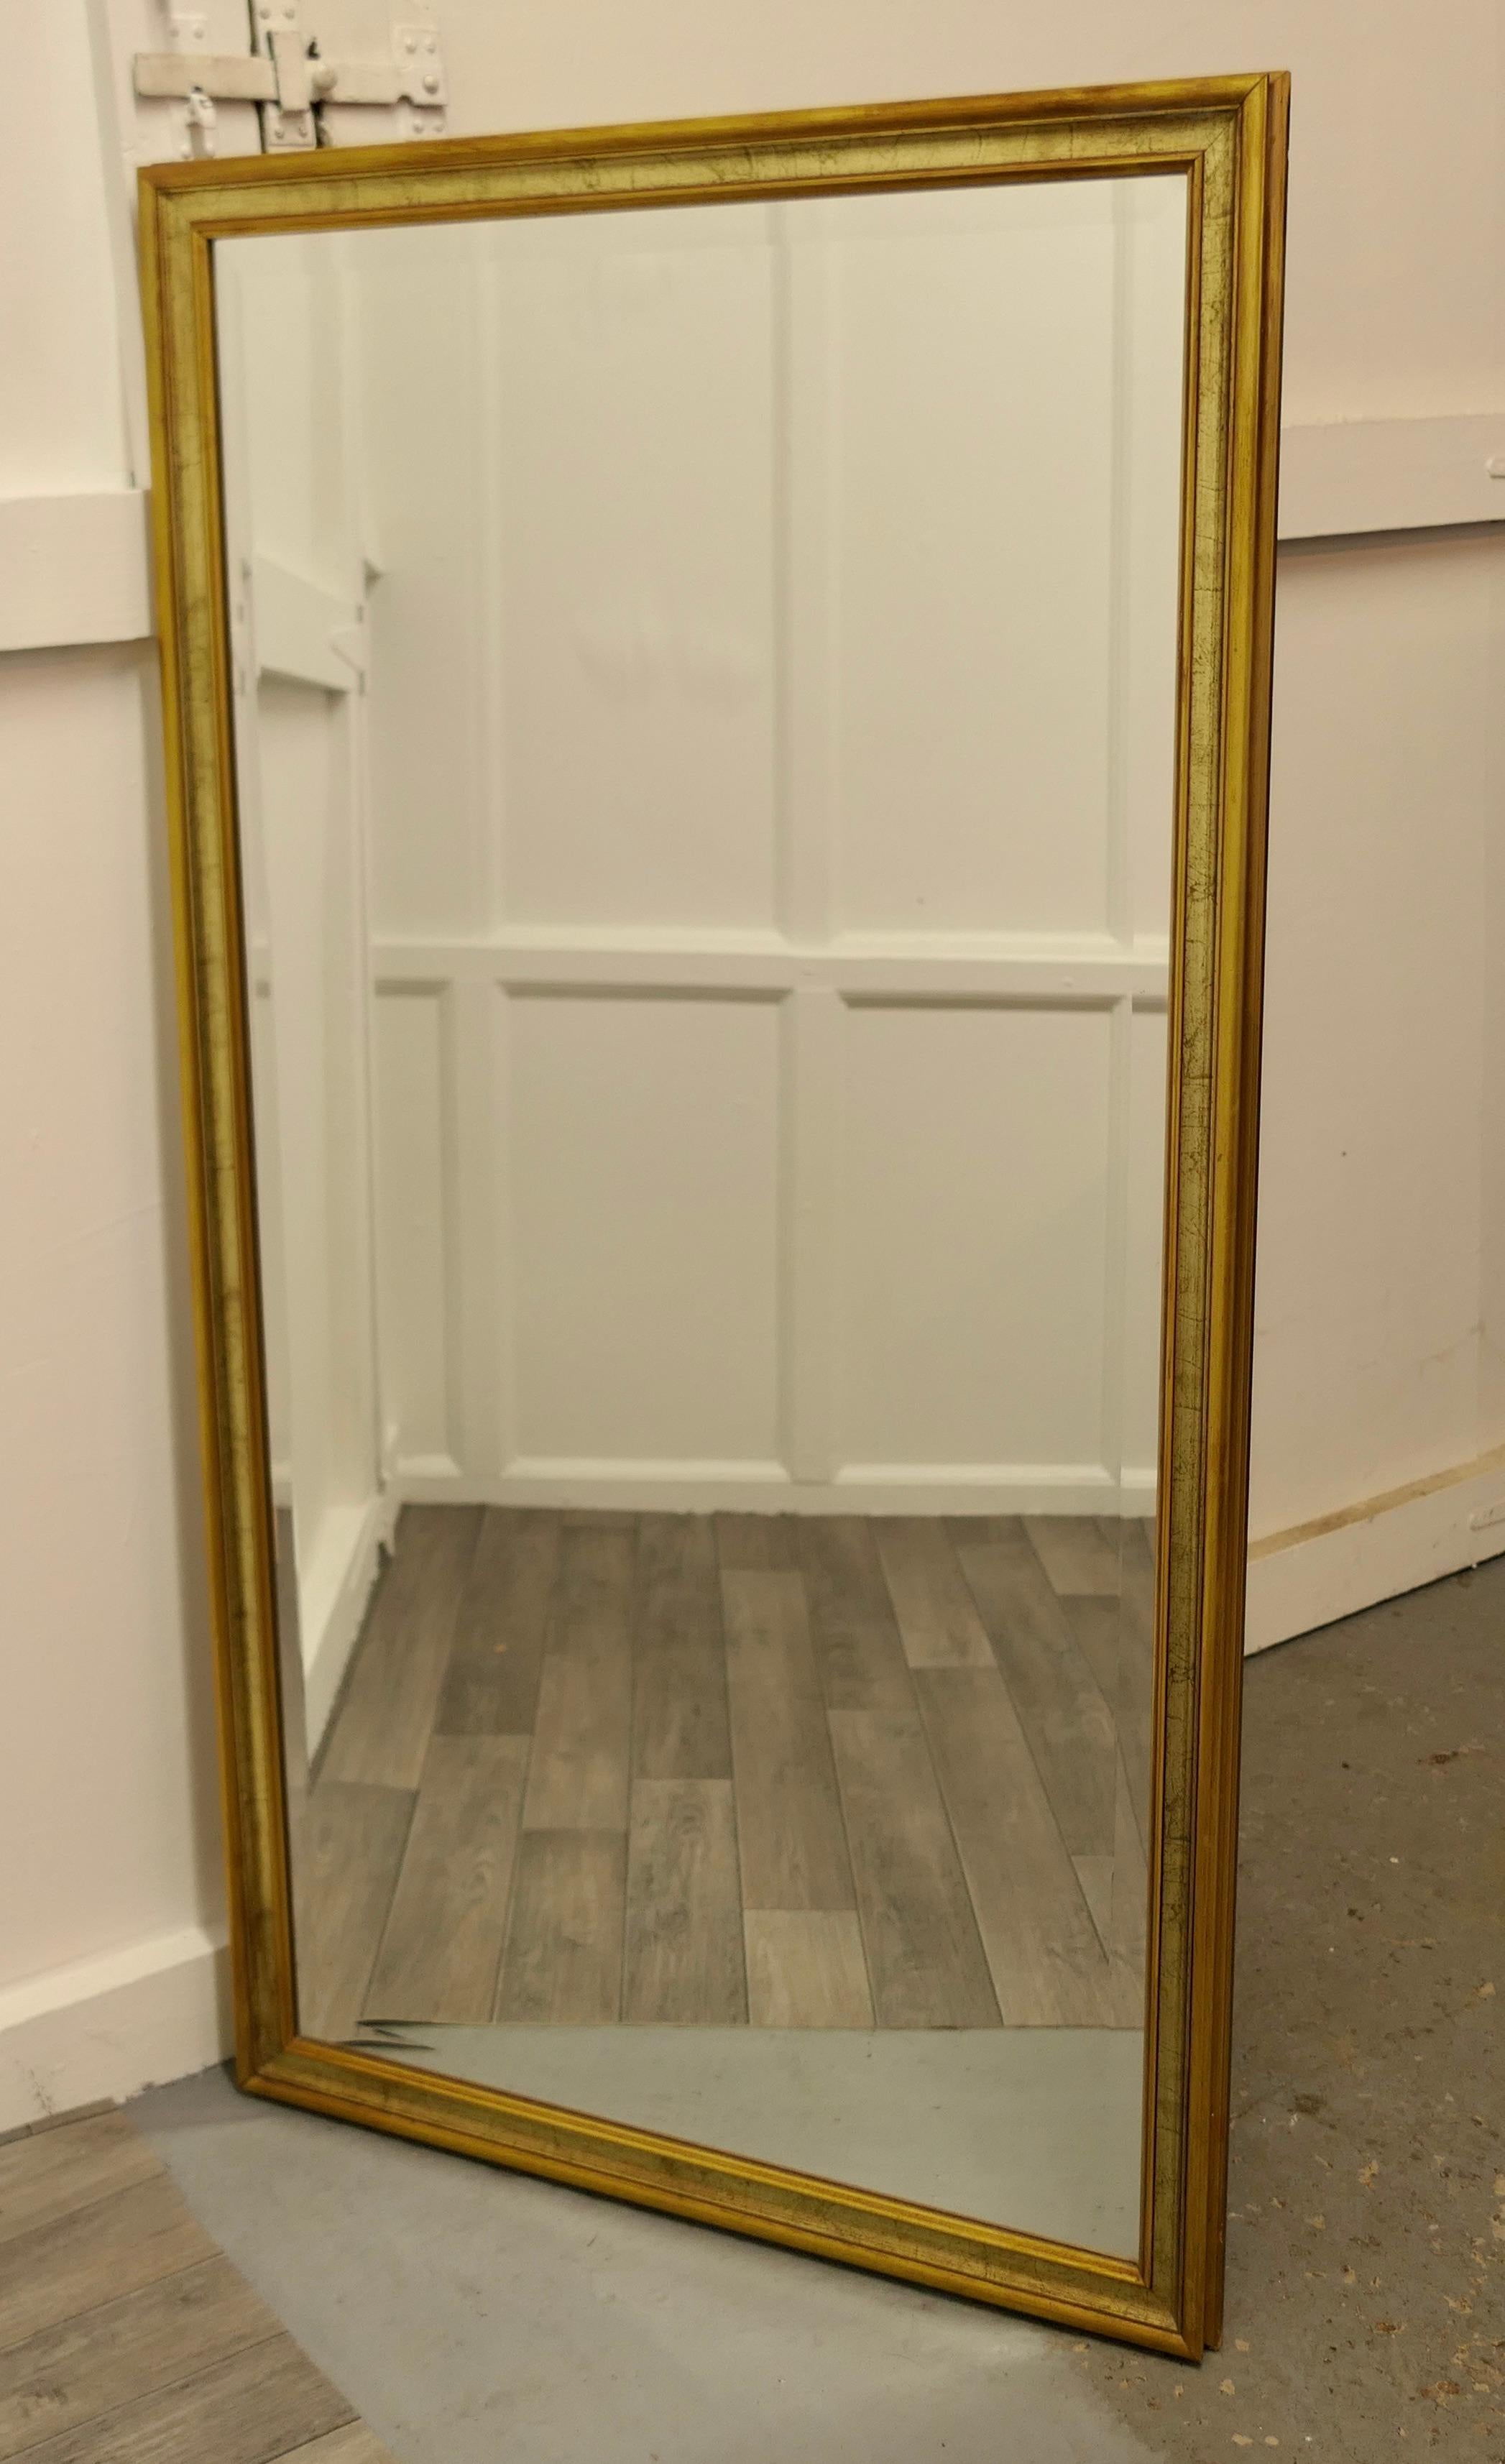 A decorative long gilt dressing mirror.

A delightful piece, the mirror has a 2” wide gilt moulded frame in tones of gold, the bevelled looking glass is in good and in unblemished condition. 
A good decorative piece.
The frame is 53” high and